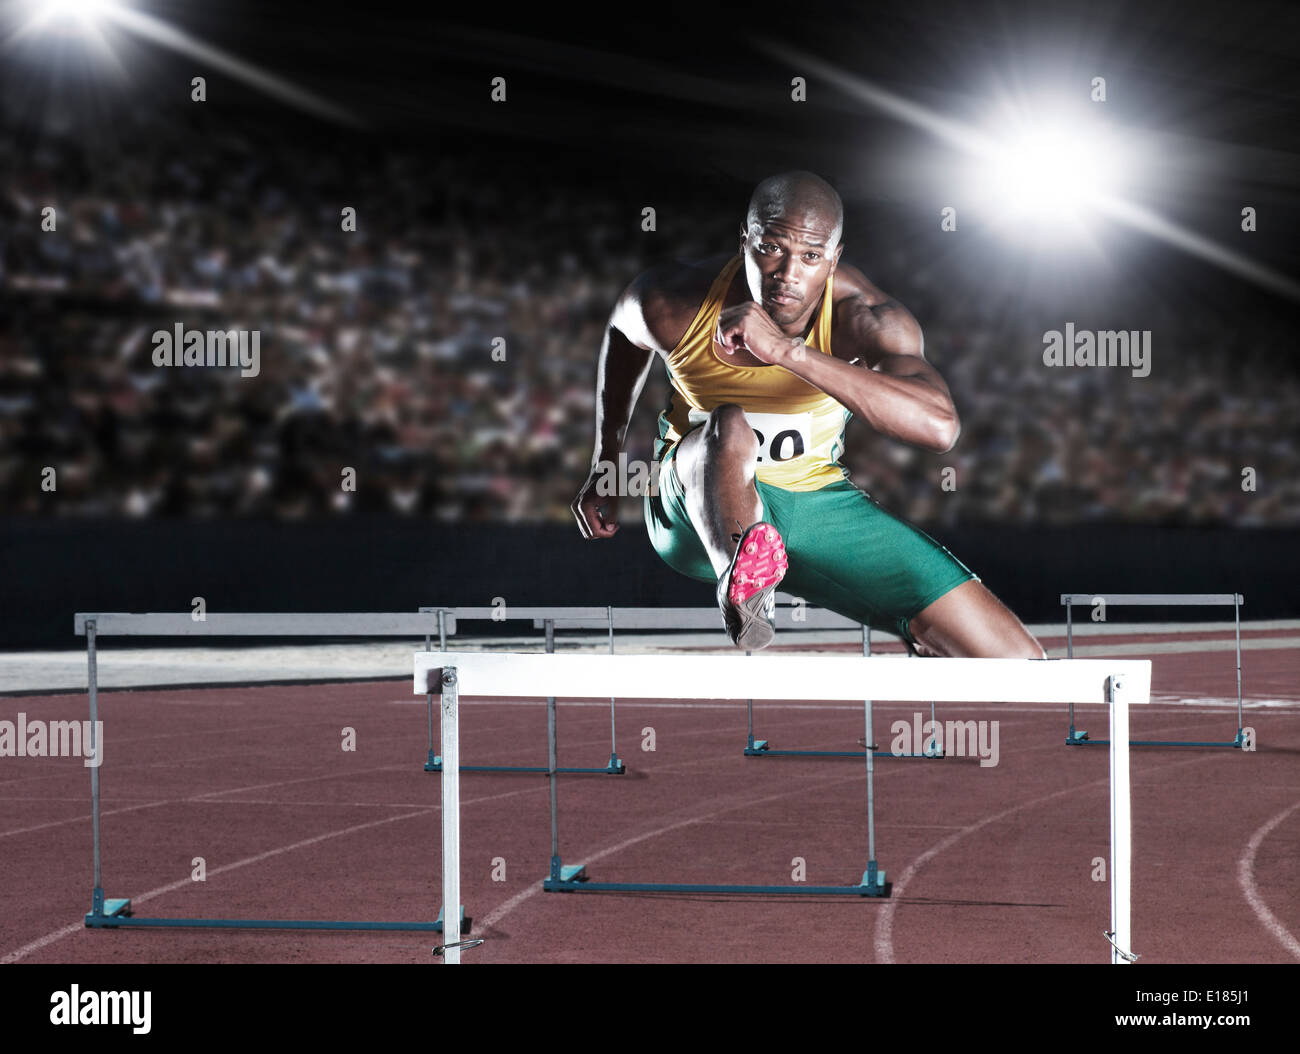 Runner clearing hurdle on track Stock Photo